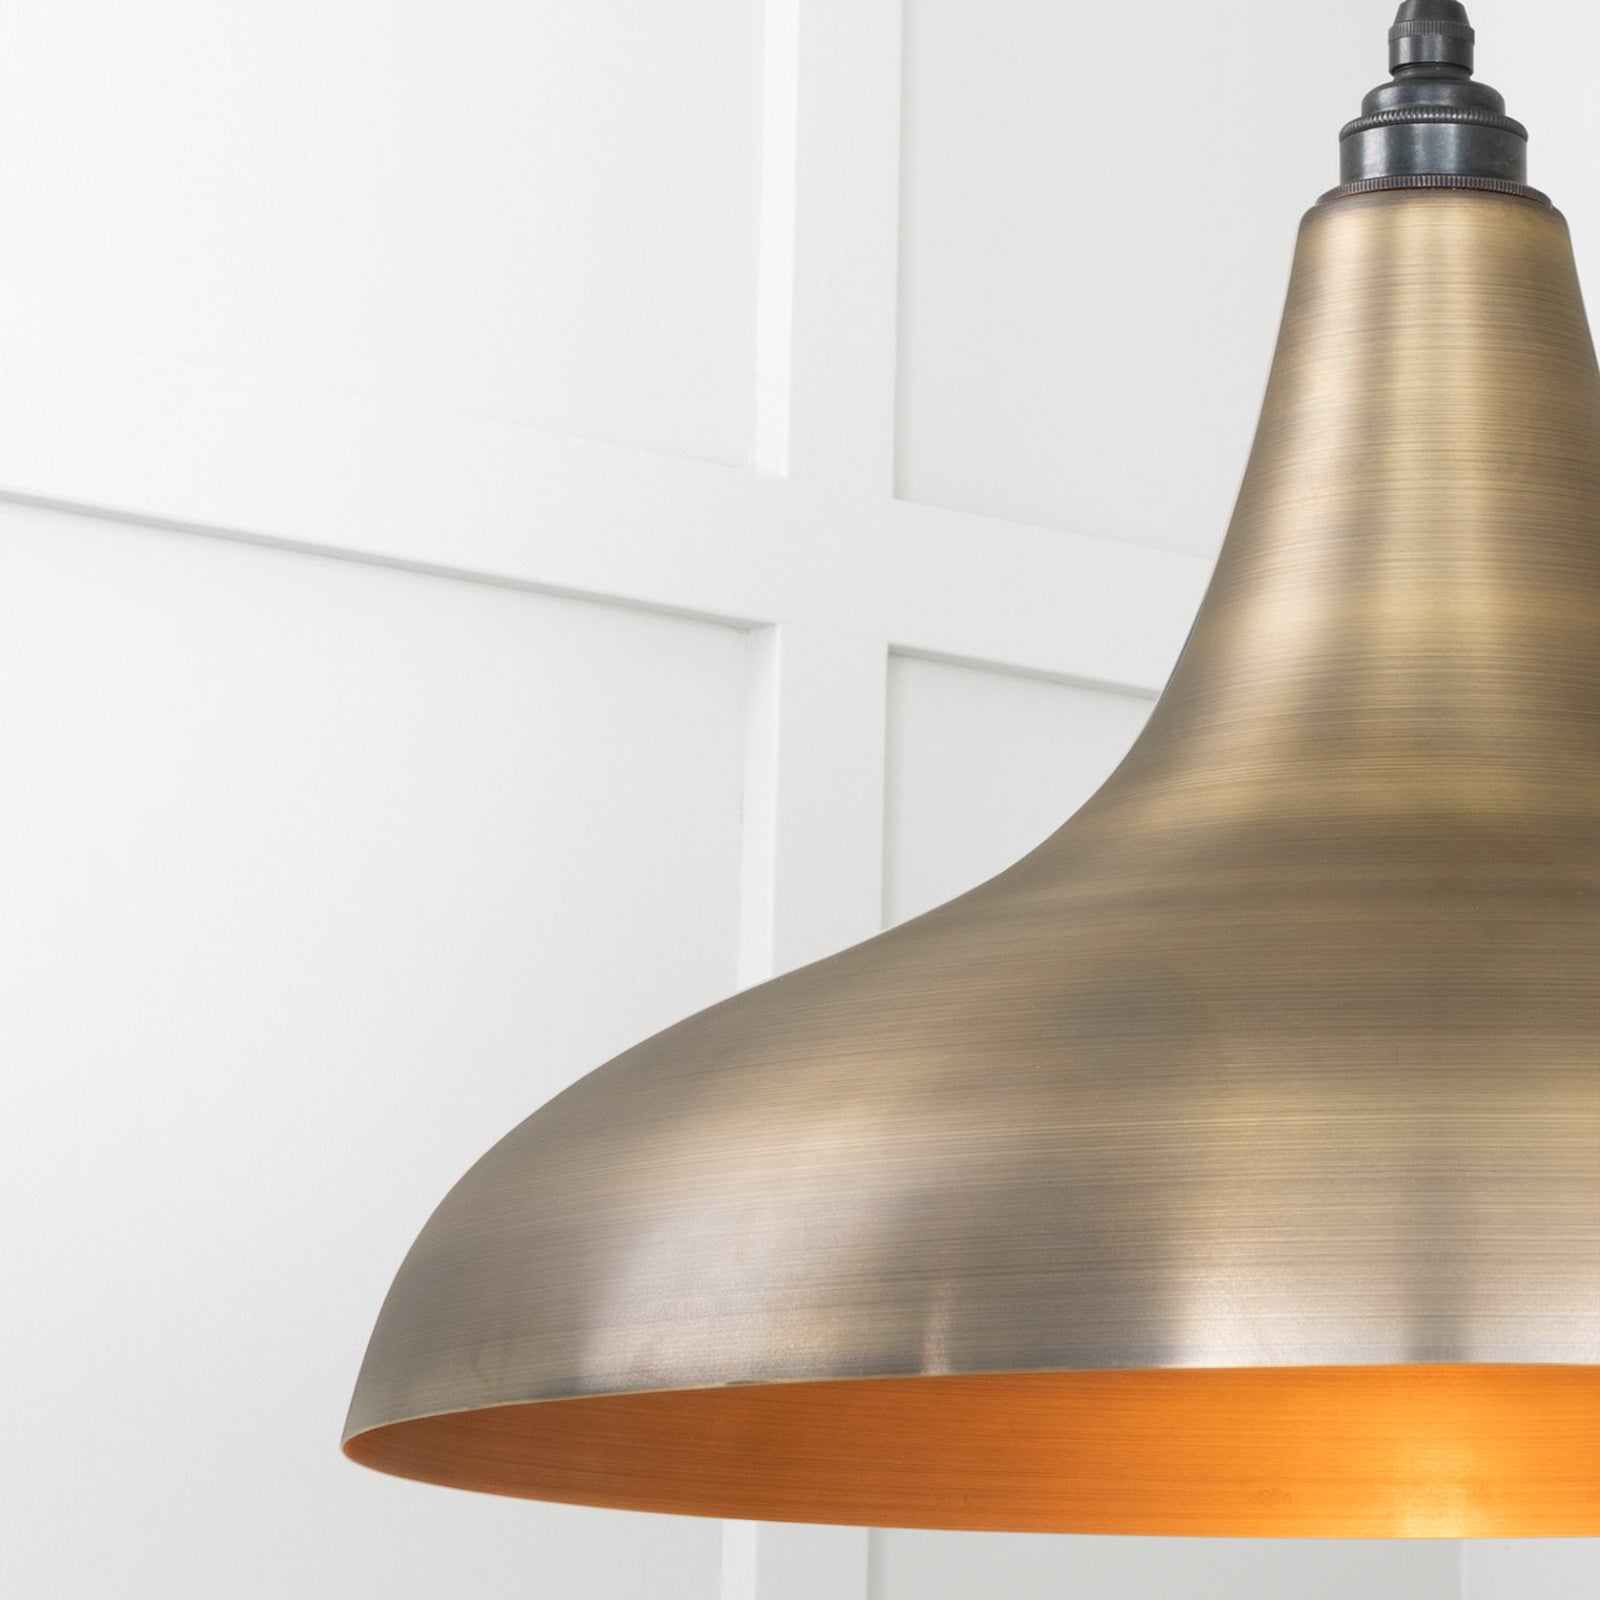 SHOW Close Up Image of Frankley Ceiling Light in Aged Brass